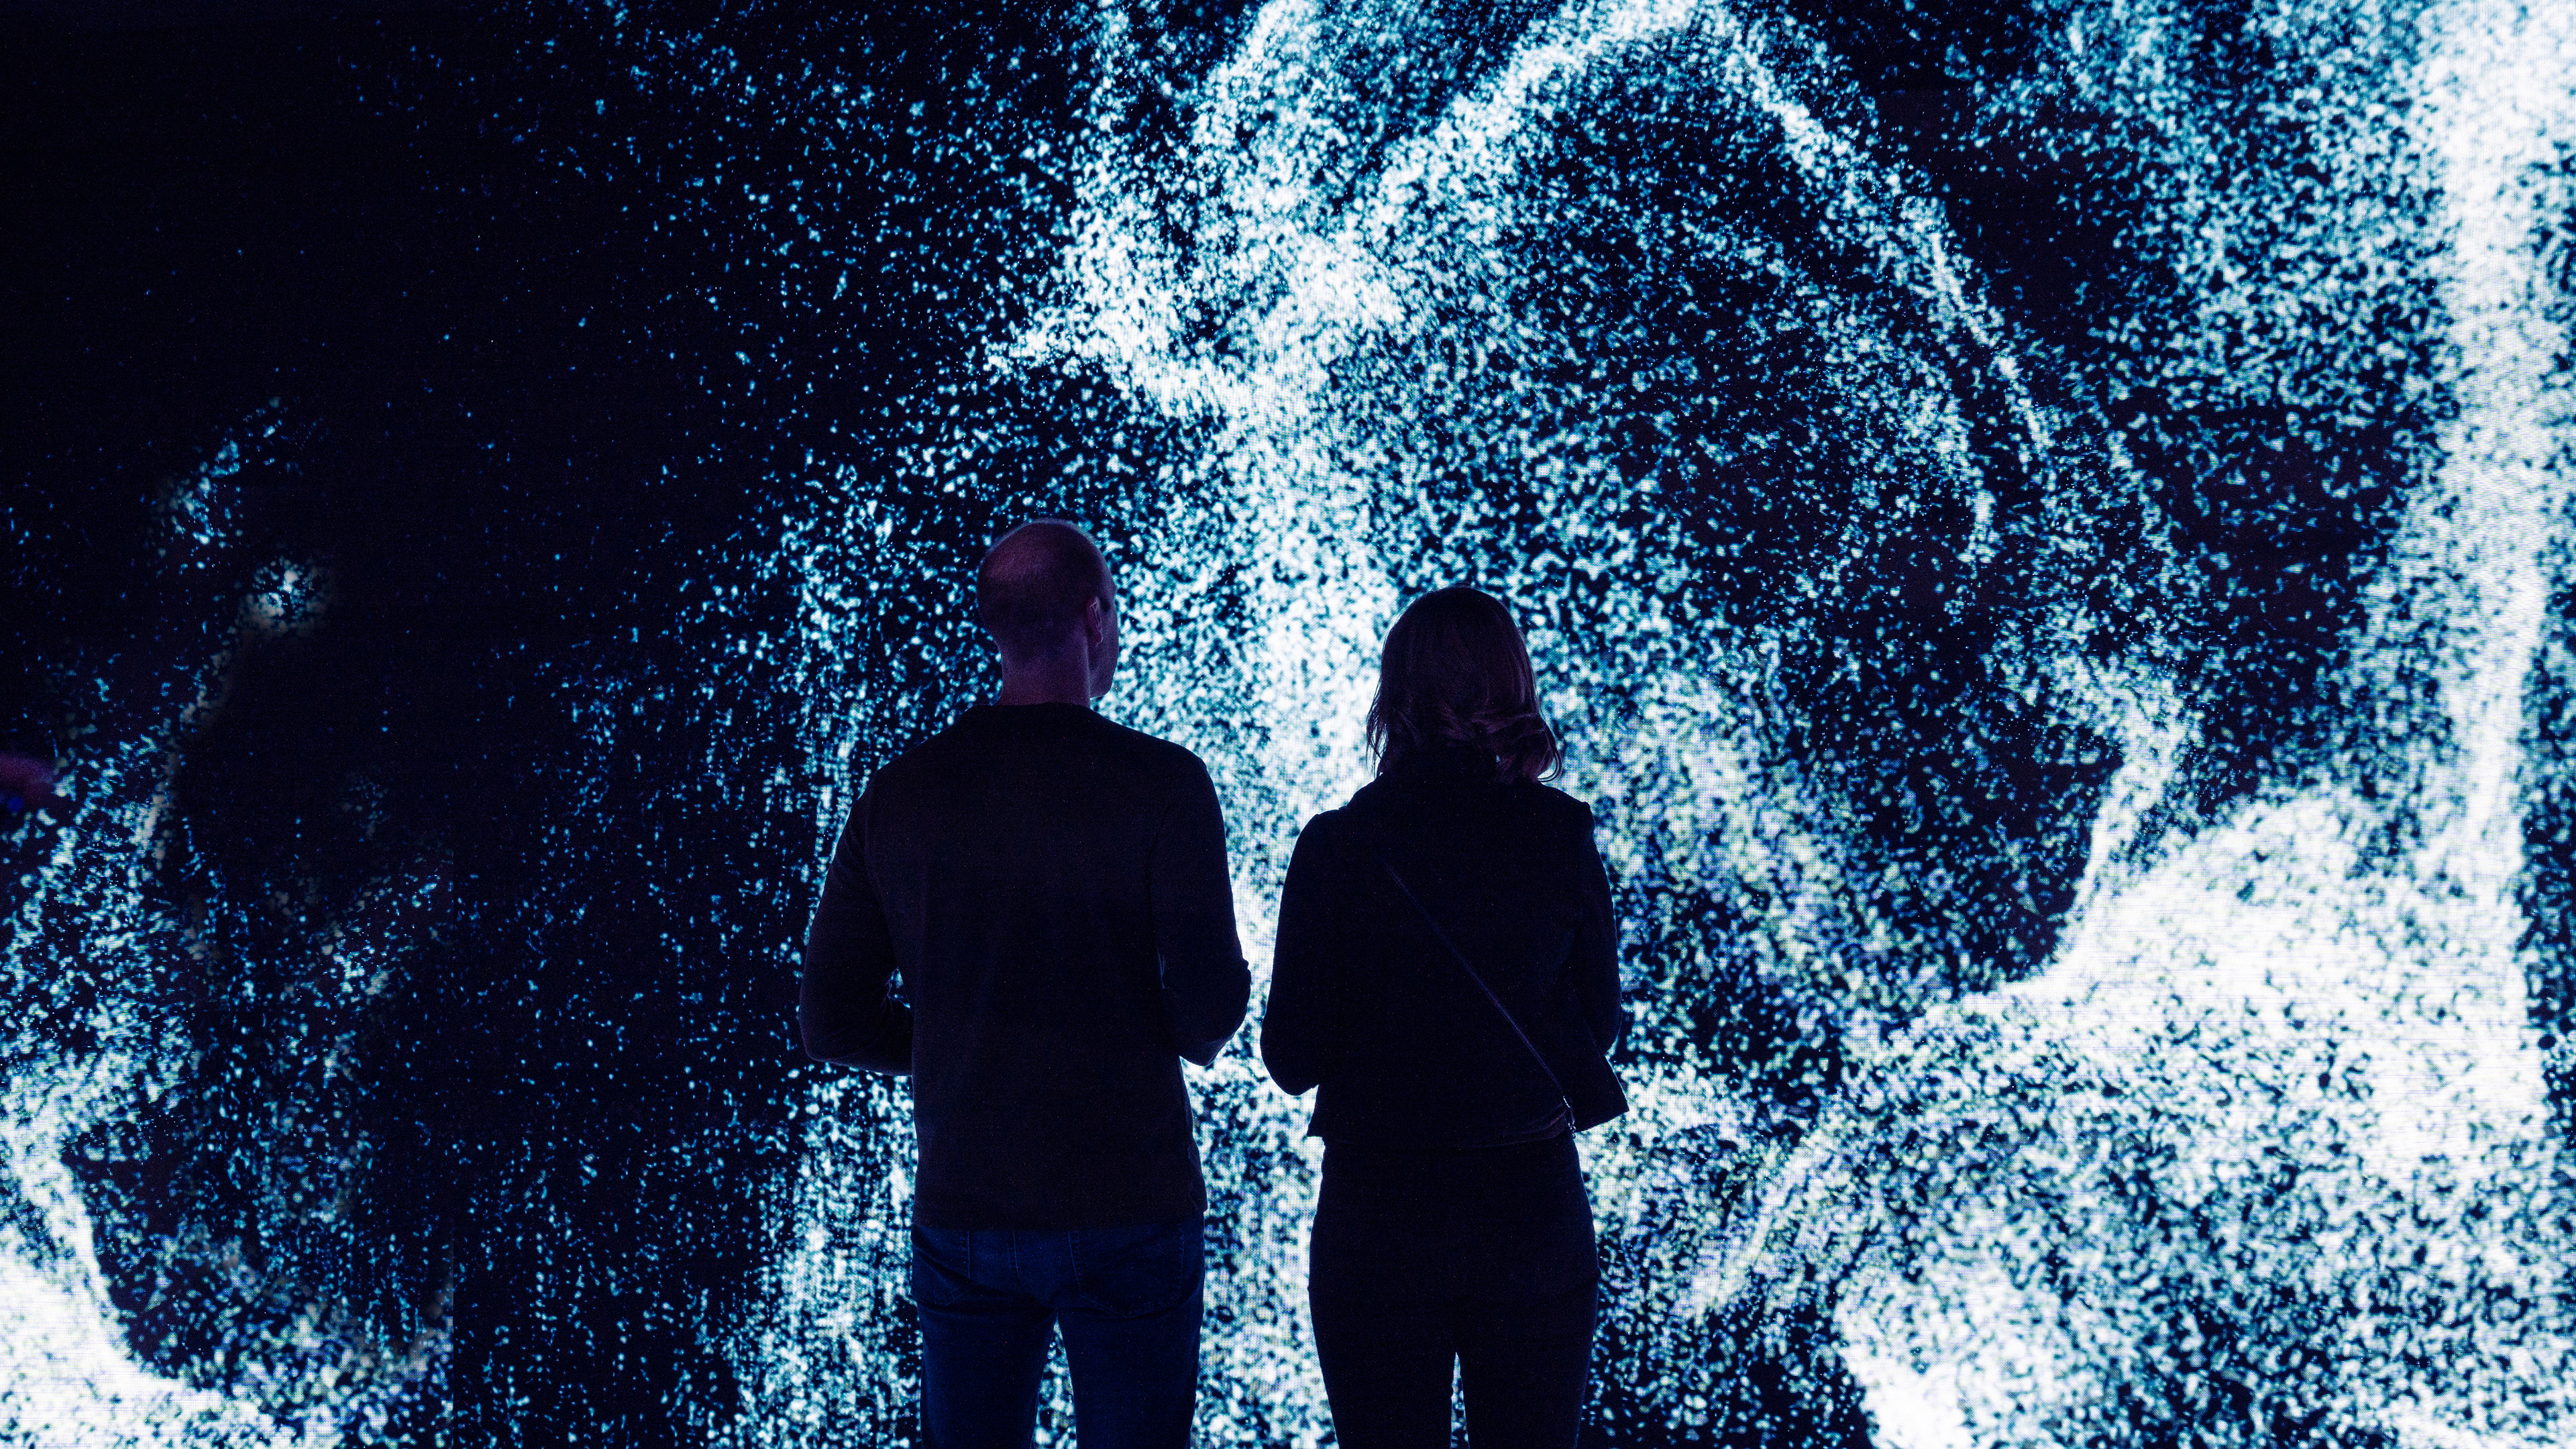 Two people standing in front of a large led screen filled with generative steam particles